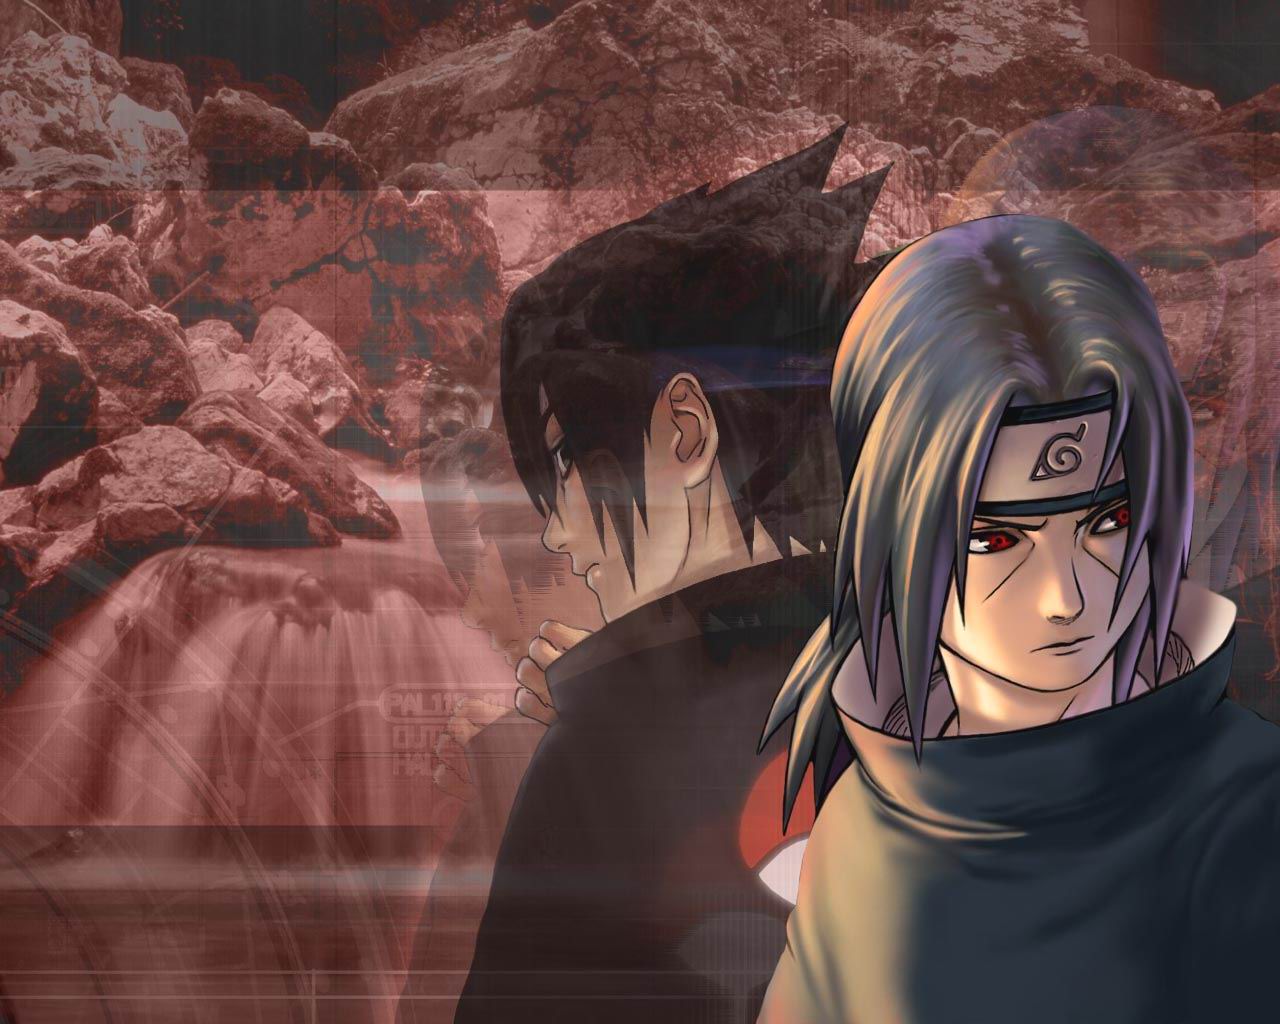 ... Uchiha clan, after Itachi killed all of its members except his younger